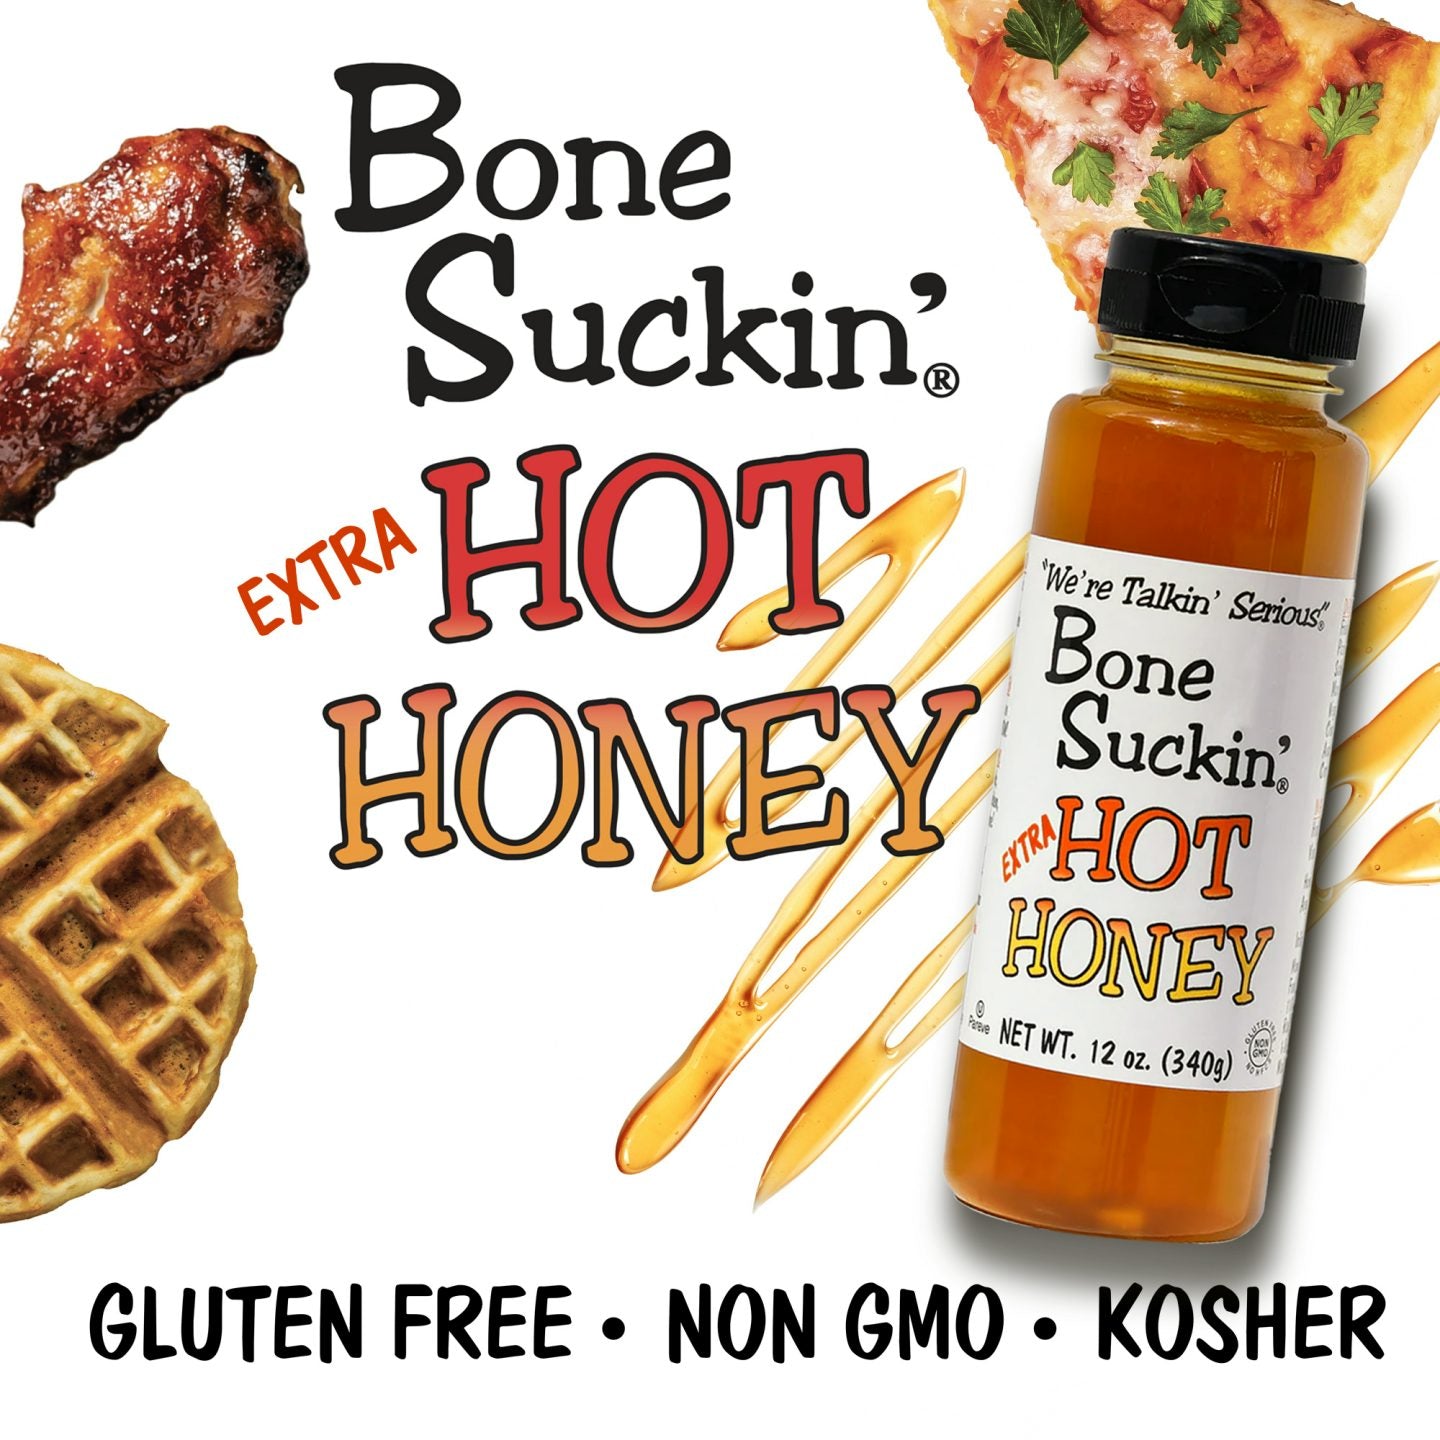 Bone Suckin' Extra Hot Honey, 12, oz. Let's turn up the heat. Drizzle on: Wings, Fried Chicken, Pizza, Ribs, Burgers, Salmon, Cheese, Salads, Waffles & More.